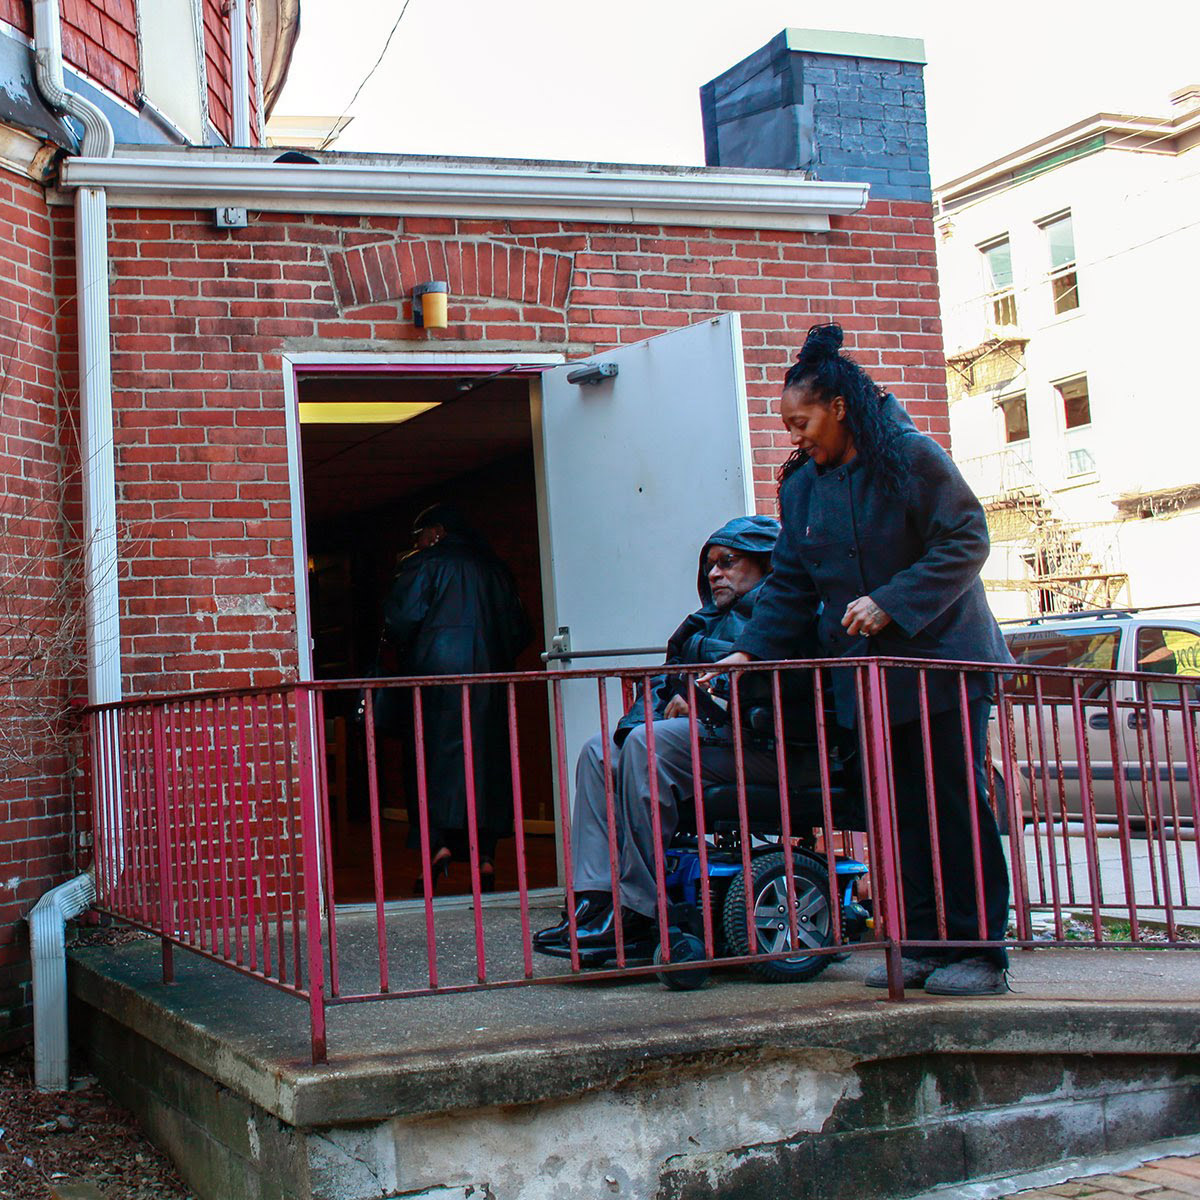 Photograph of an older Black man in motorized wheelchair going up a ramp into the back of a church. A younger Black woman walks beside him, helping him inside.